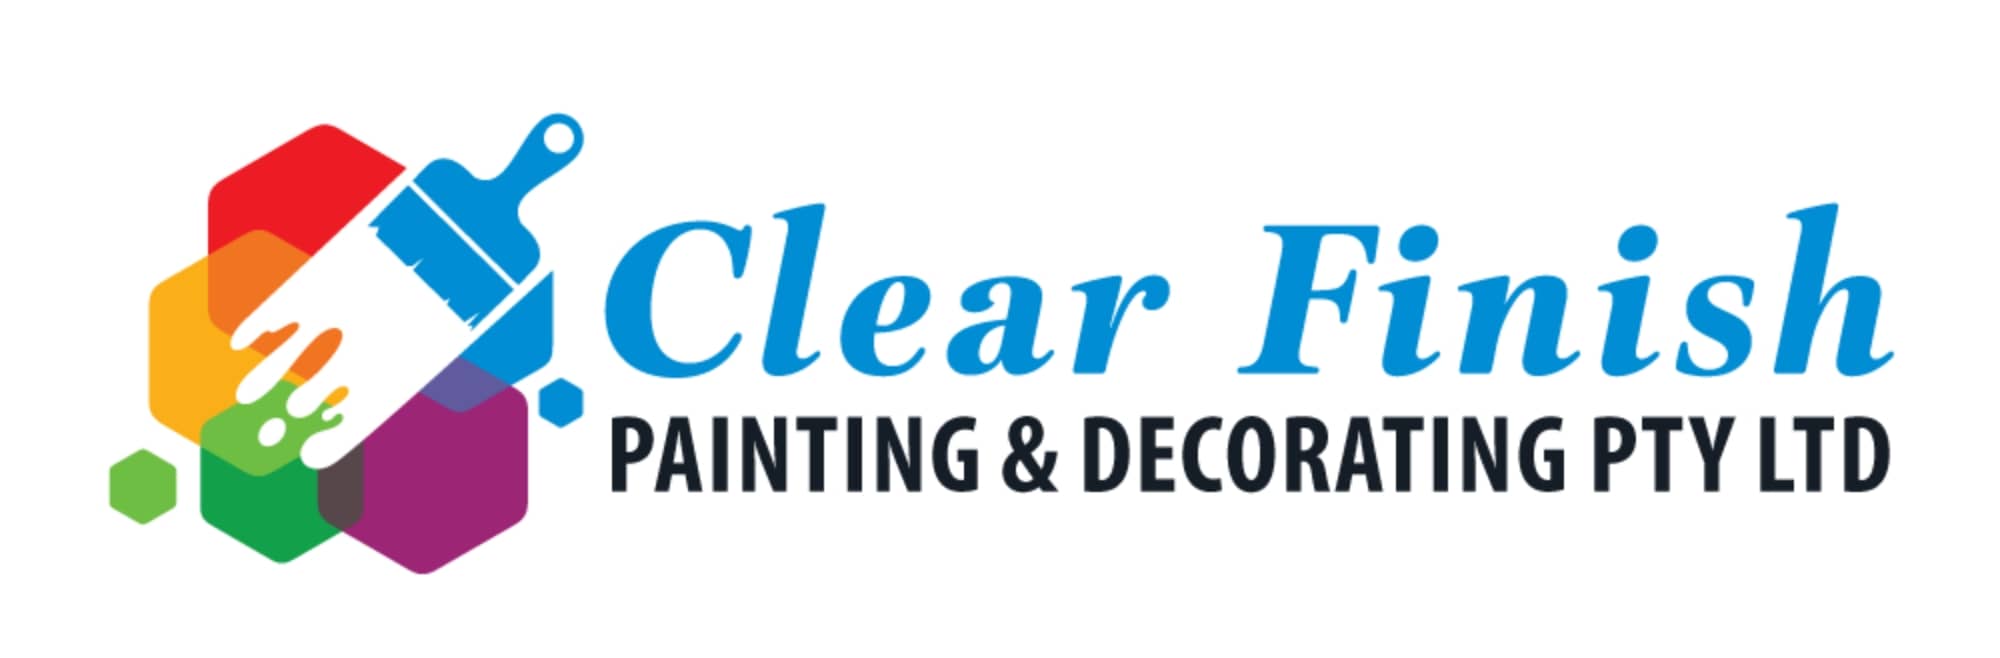 Clear Finish Painting and Decorating Services